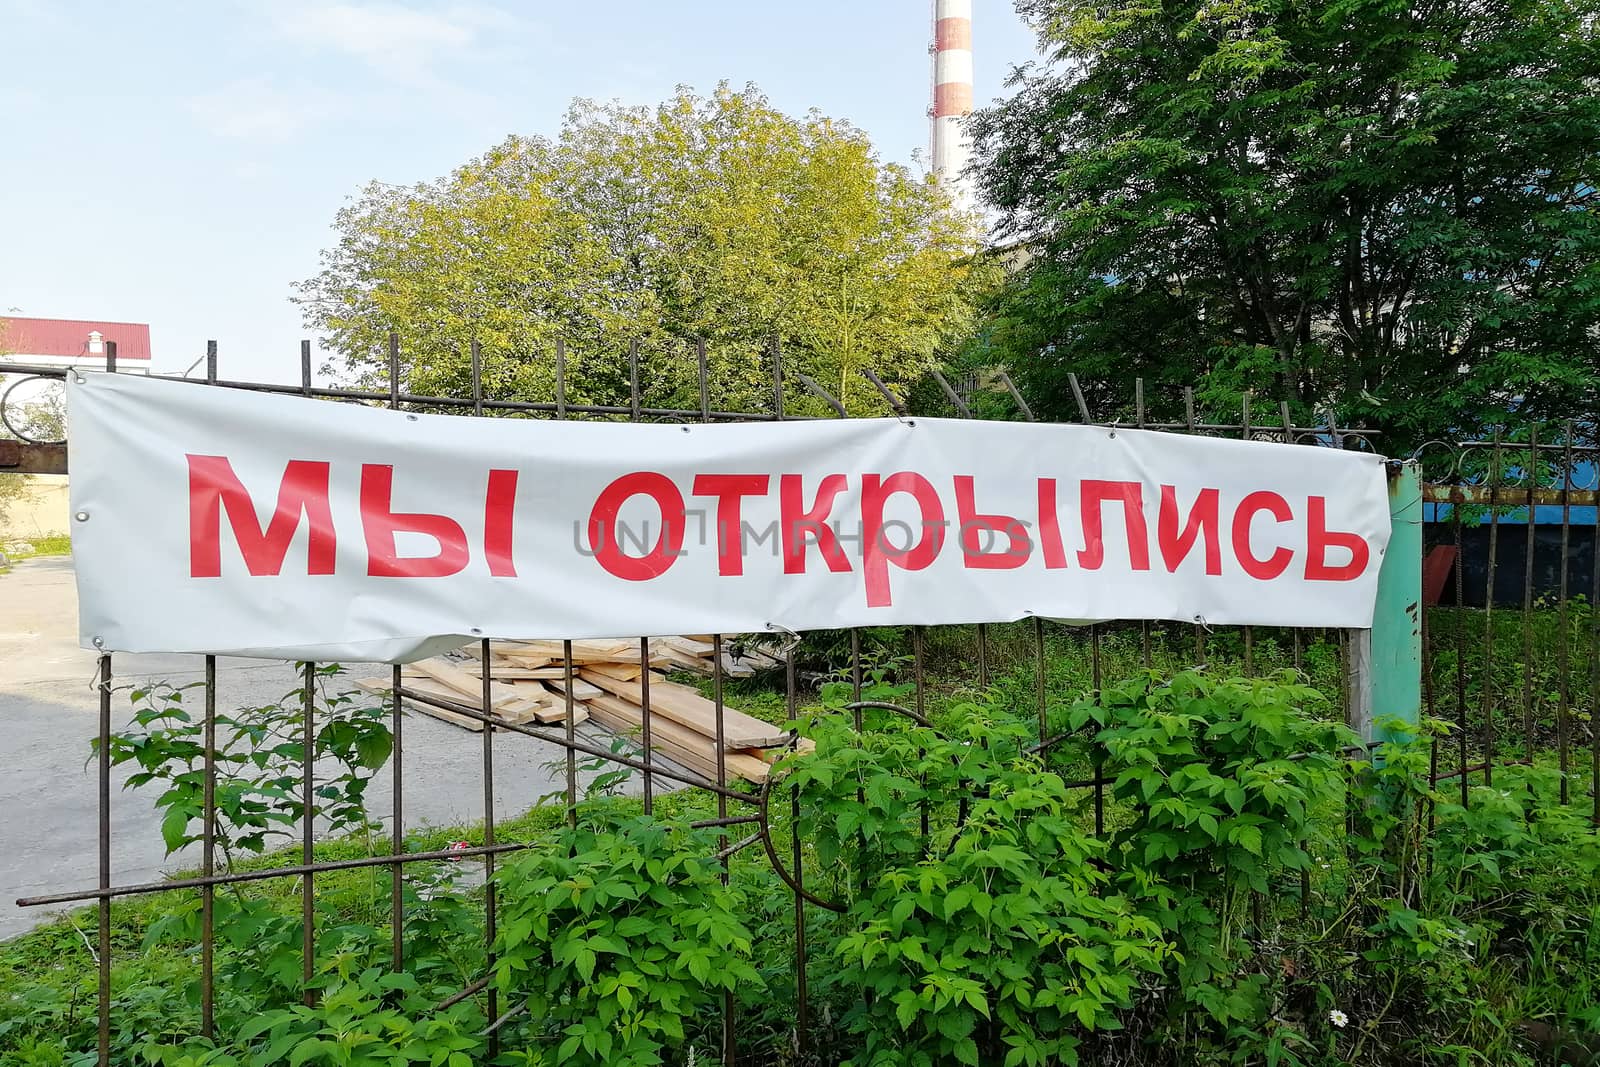 Poster - we opened on the fence. In Russian language, the text. In the city. Front and side view. by Essffes